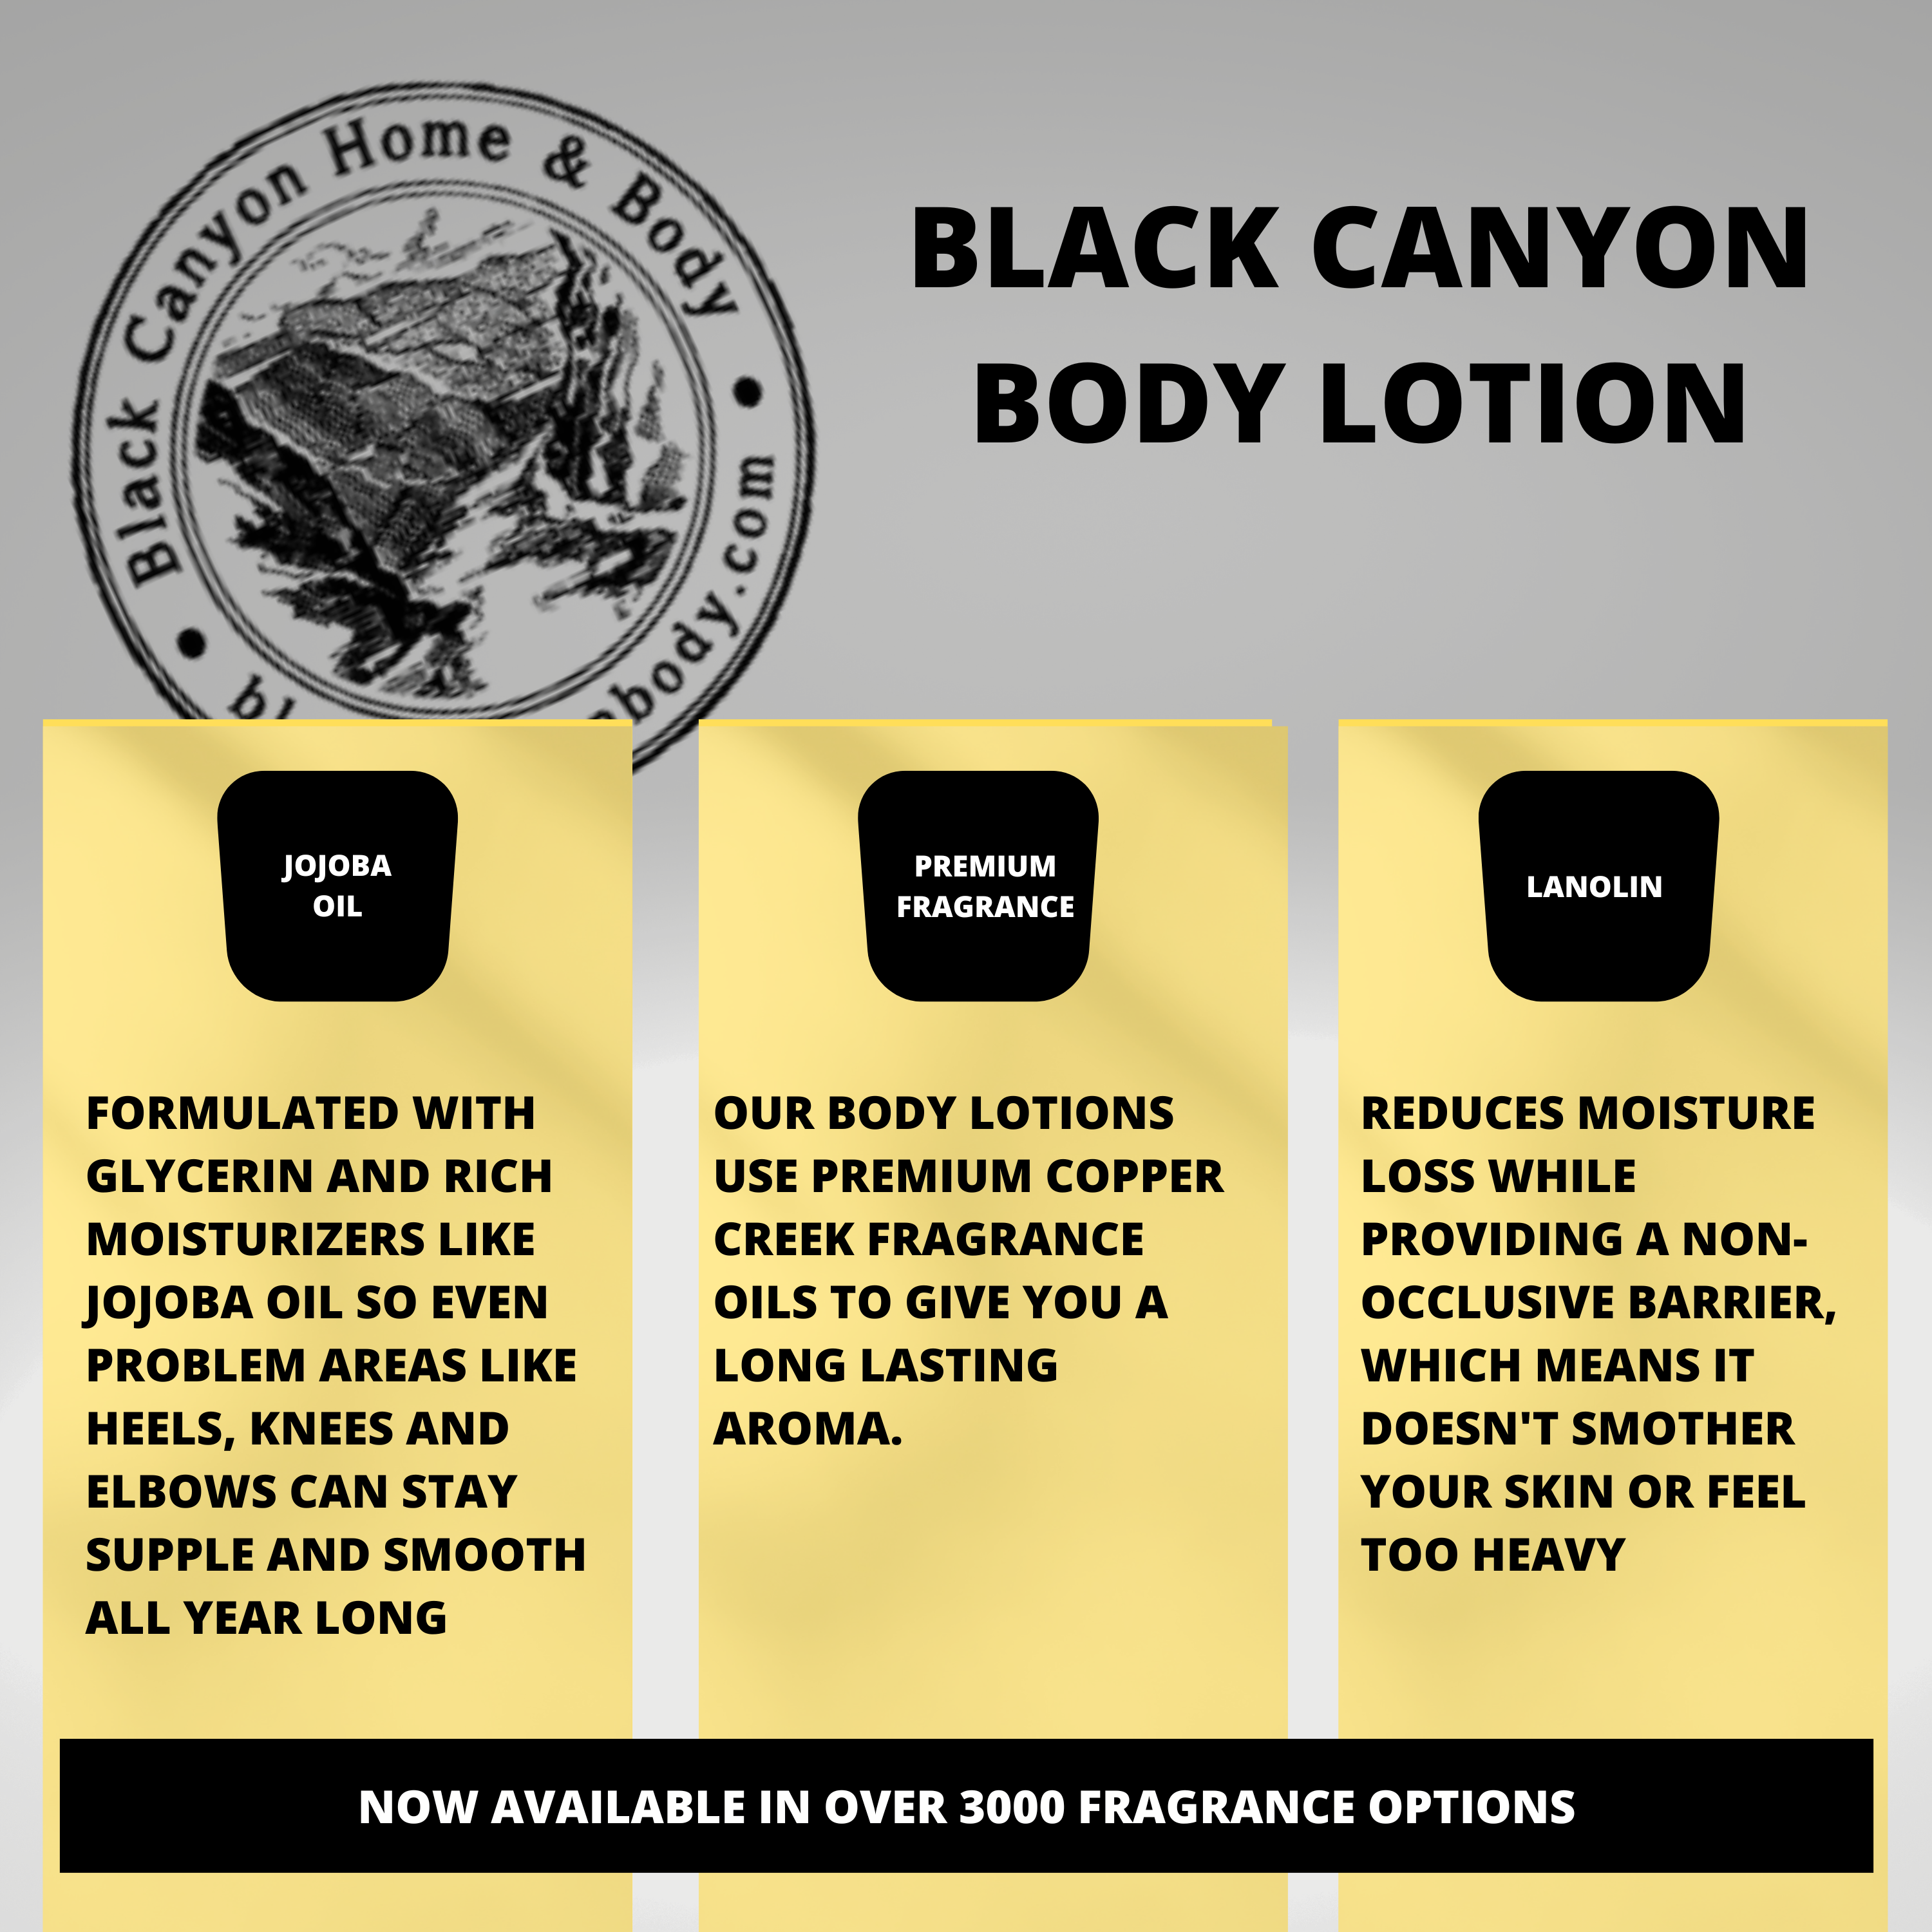 Black Canyon Nice & Naughty Scented Luxury Body Lotion with Lanolin and Jojoba Oil